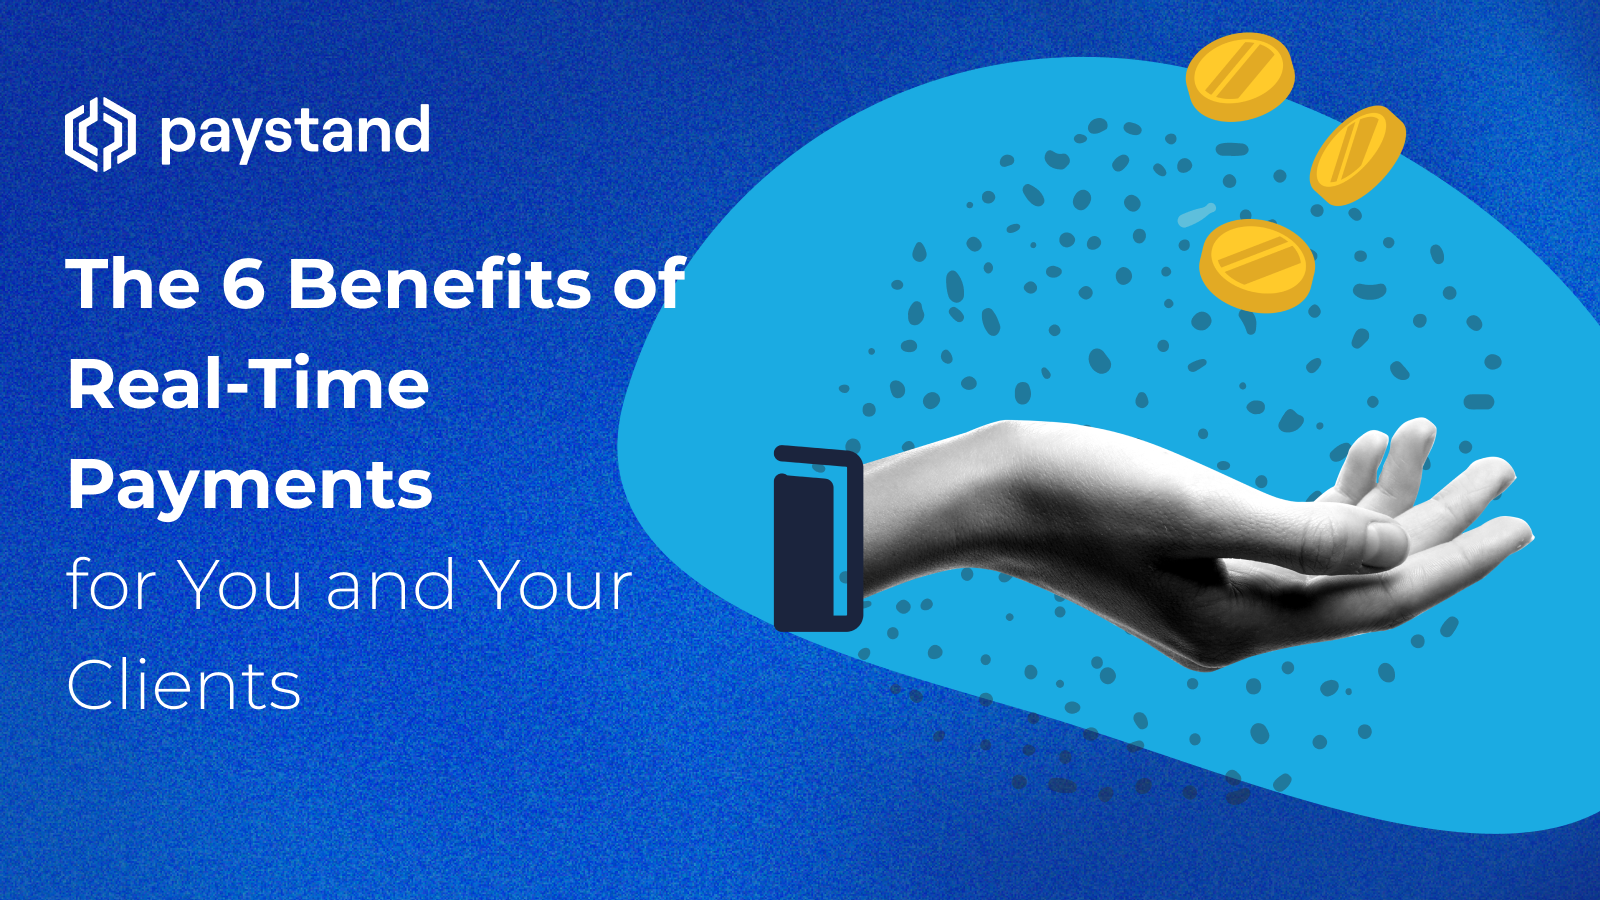 The 6 Benefits of Real-Time Payments for You and Your Clients